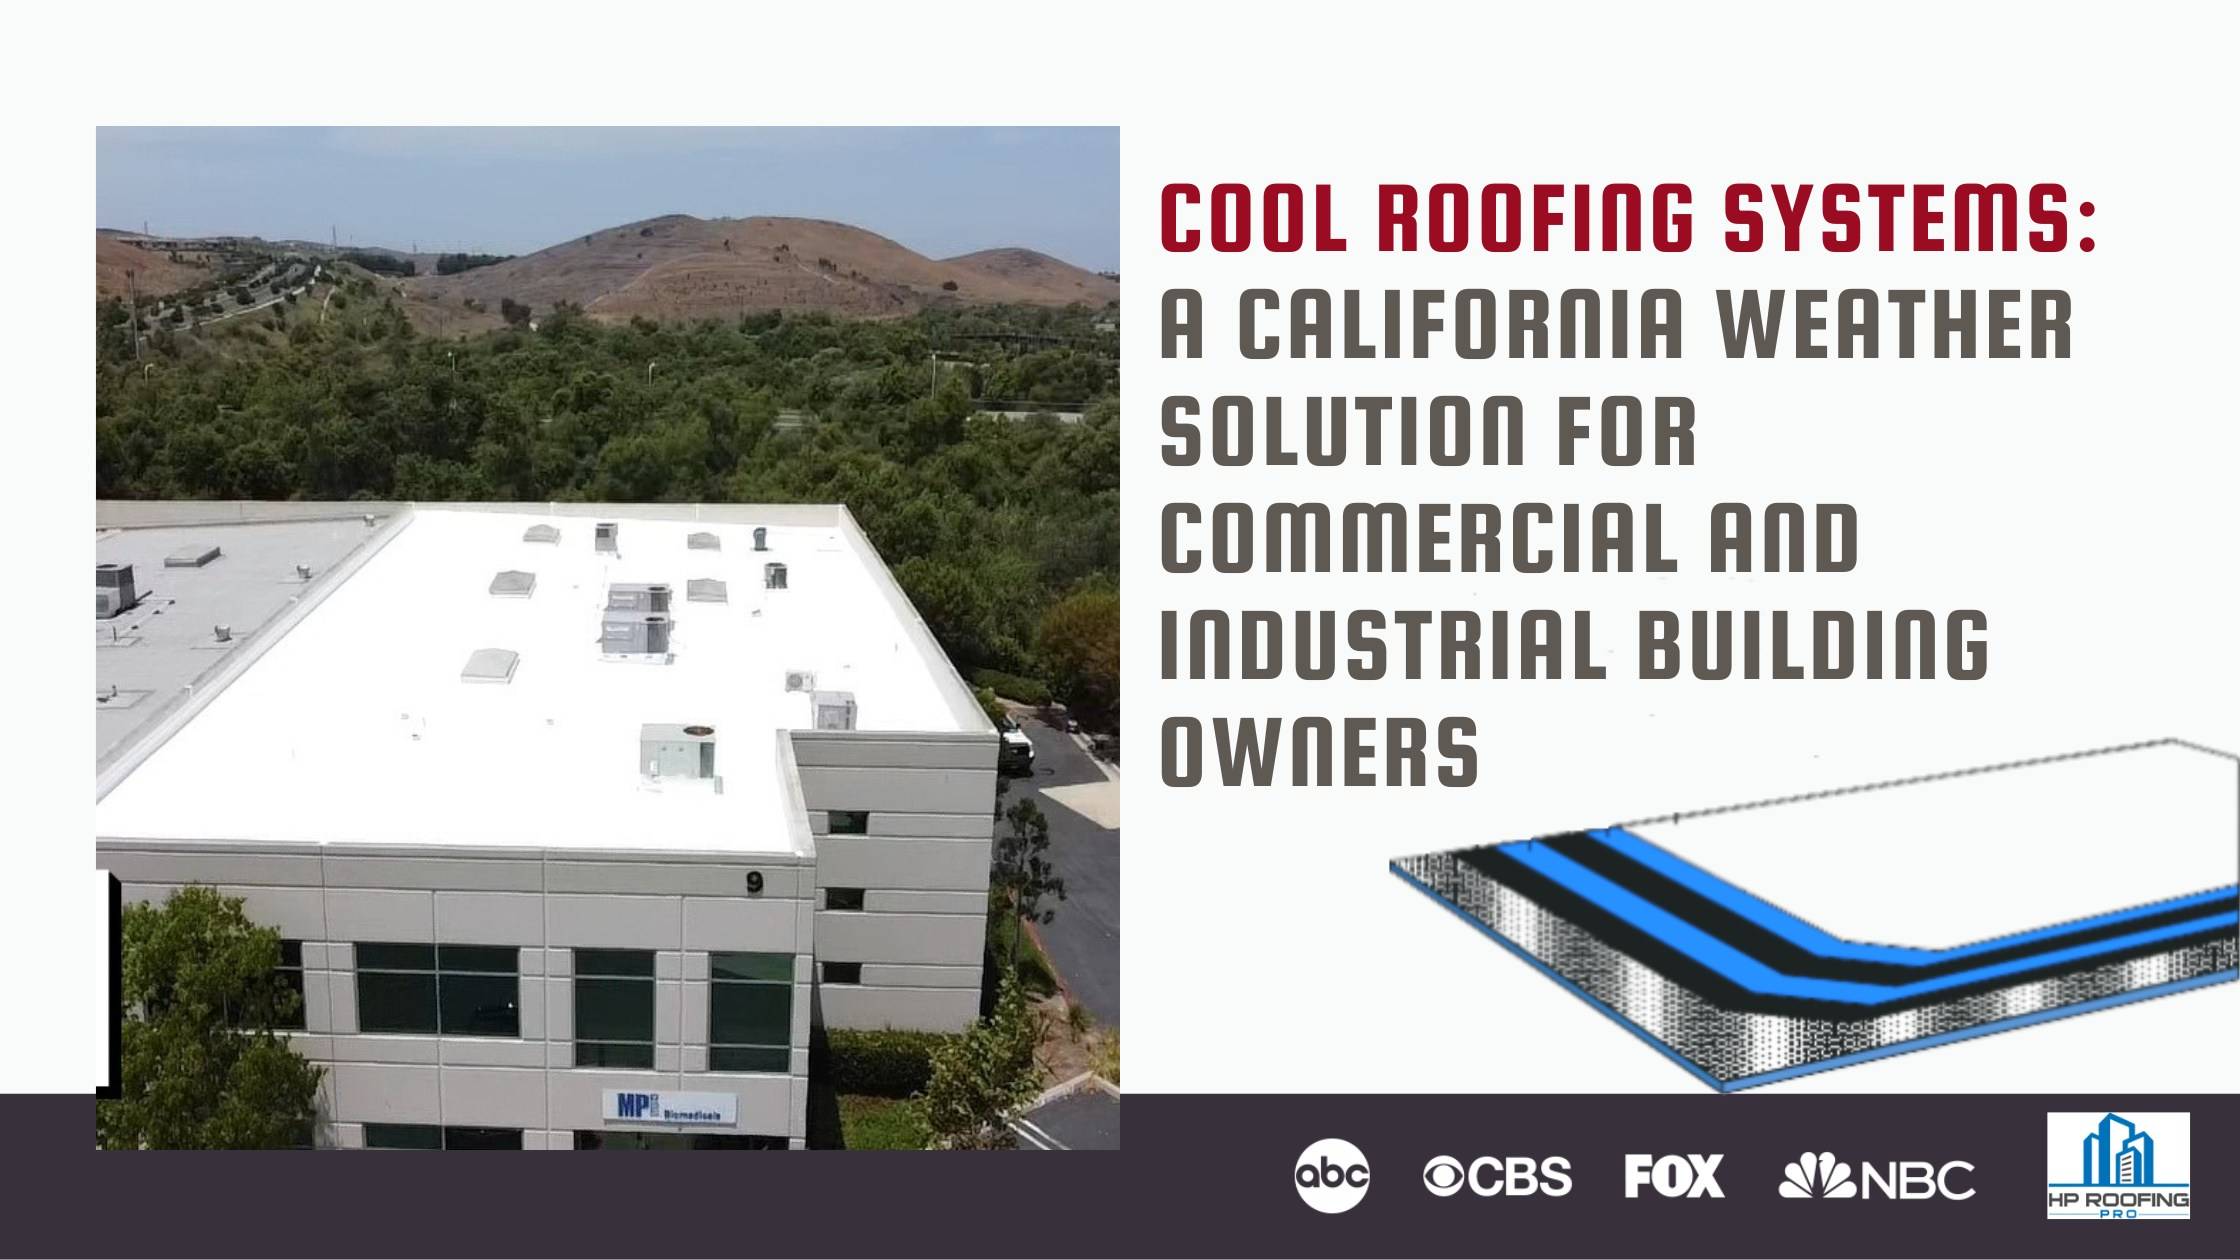 Cool Roofing Systems: A California Weather Solution for Commercial and Industrial Building Owners